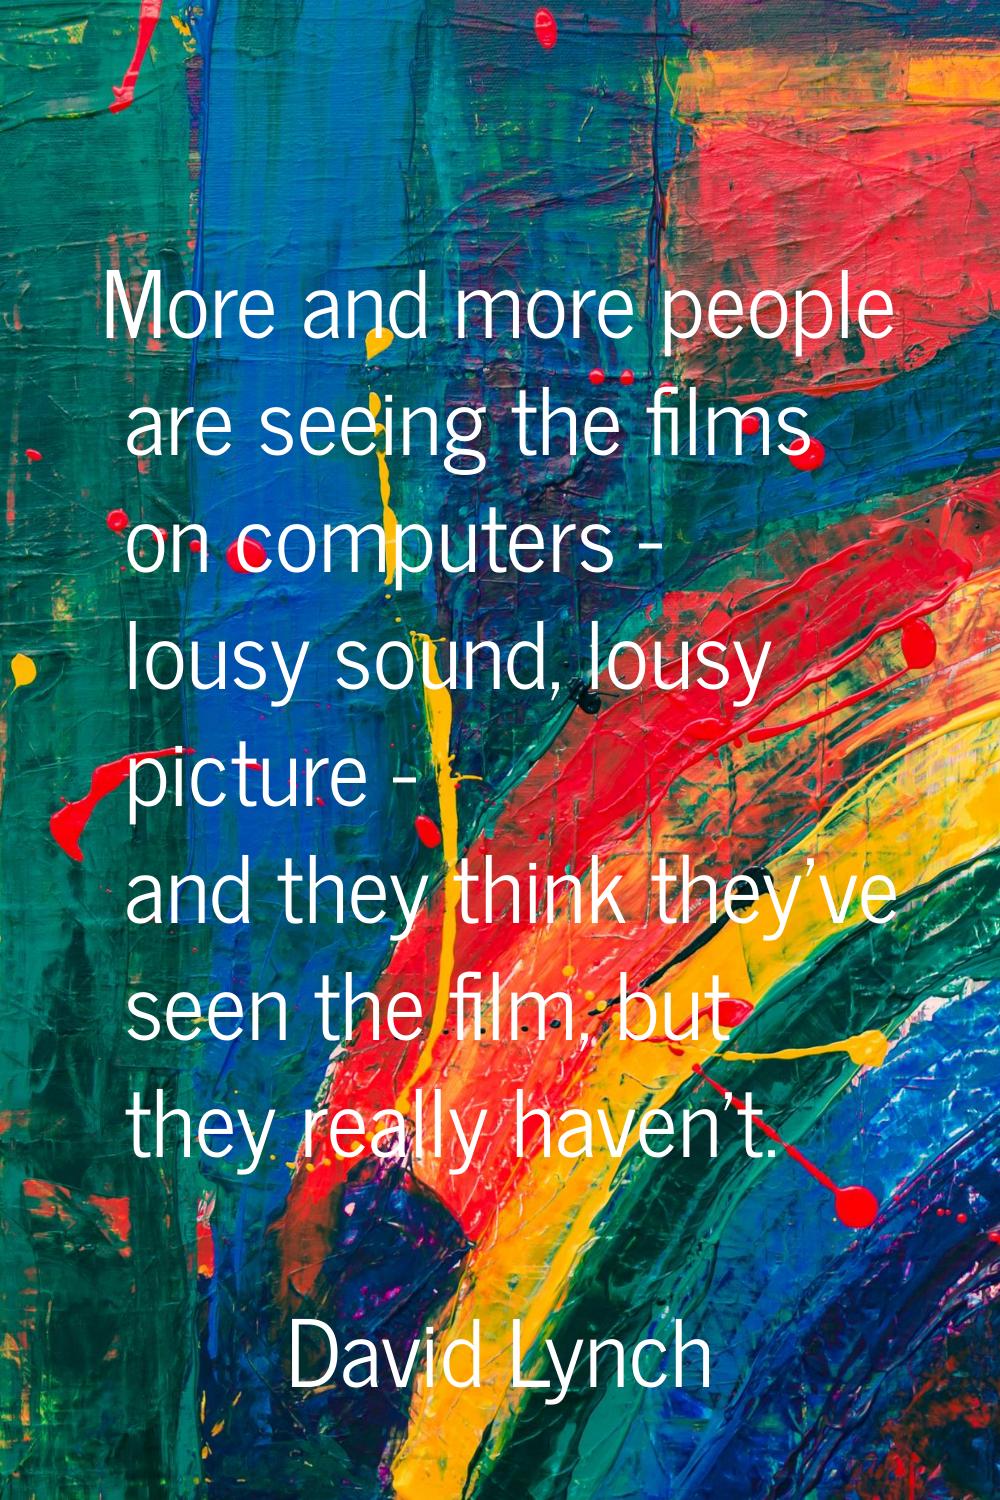 More and more people are seeing the films on computers - lousy sound, lousy picture - and they thin